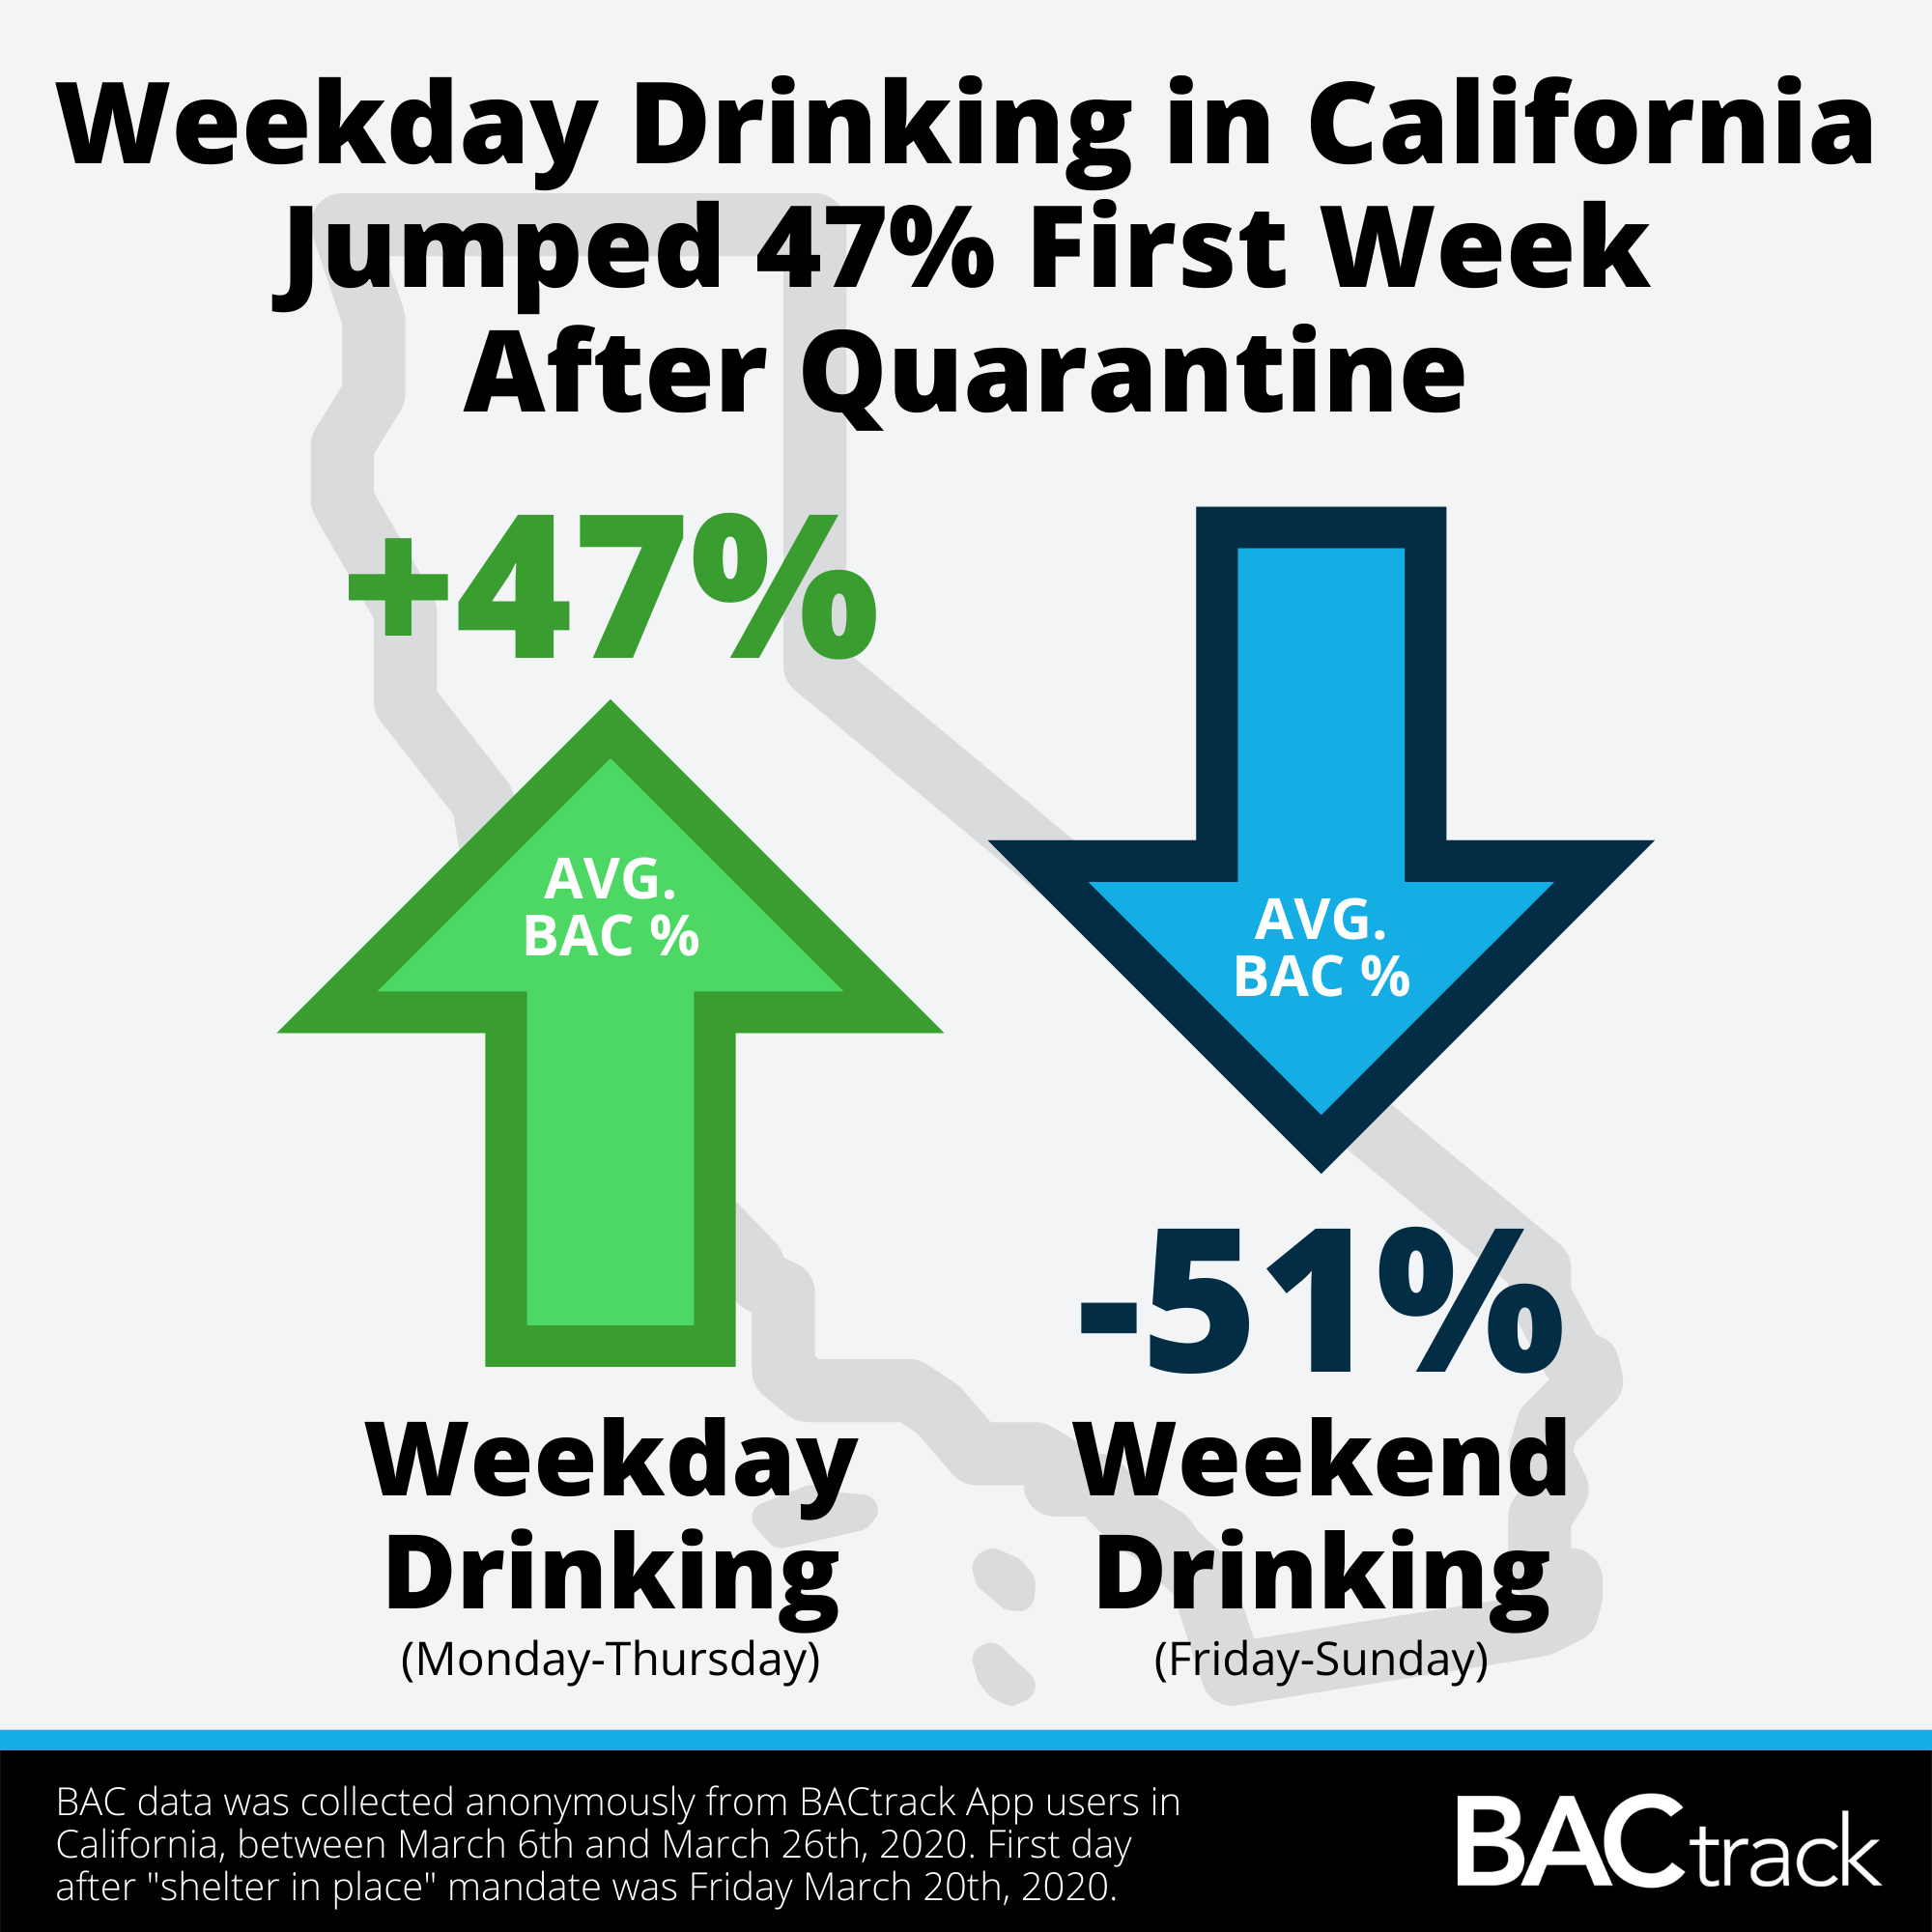 In California, weekday drinking increases while weekend drinking decreases.